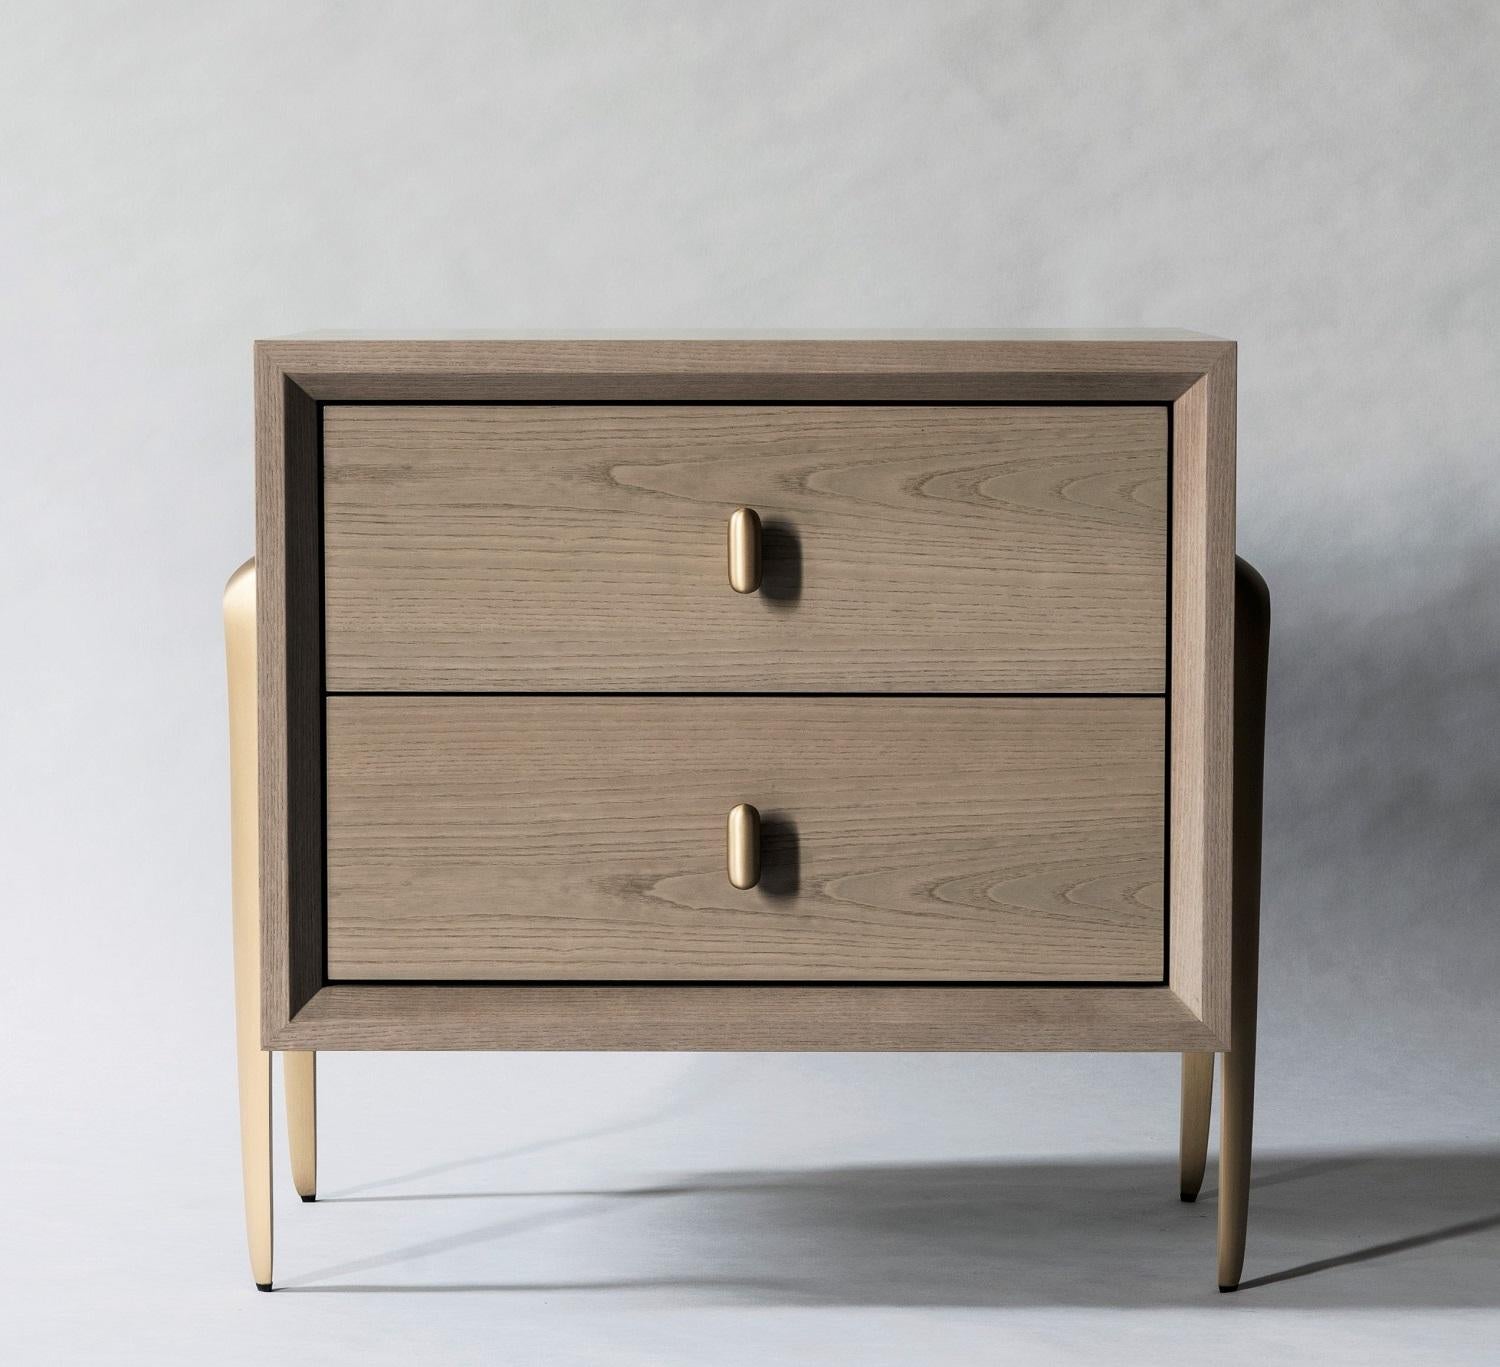 Informed by the refined craftsmanship of mid-century Italian design, the Serge Bedside Table features sculptural two-legged brackets, with a gently tapered silhouette and articulated edge. Nuanced millwork - beveled along the interior frame, with